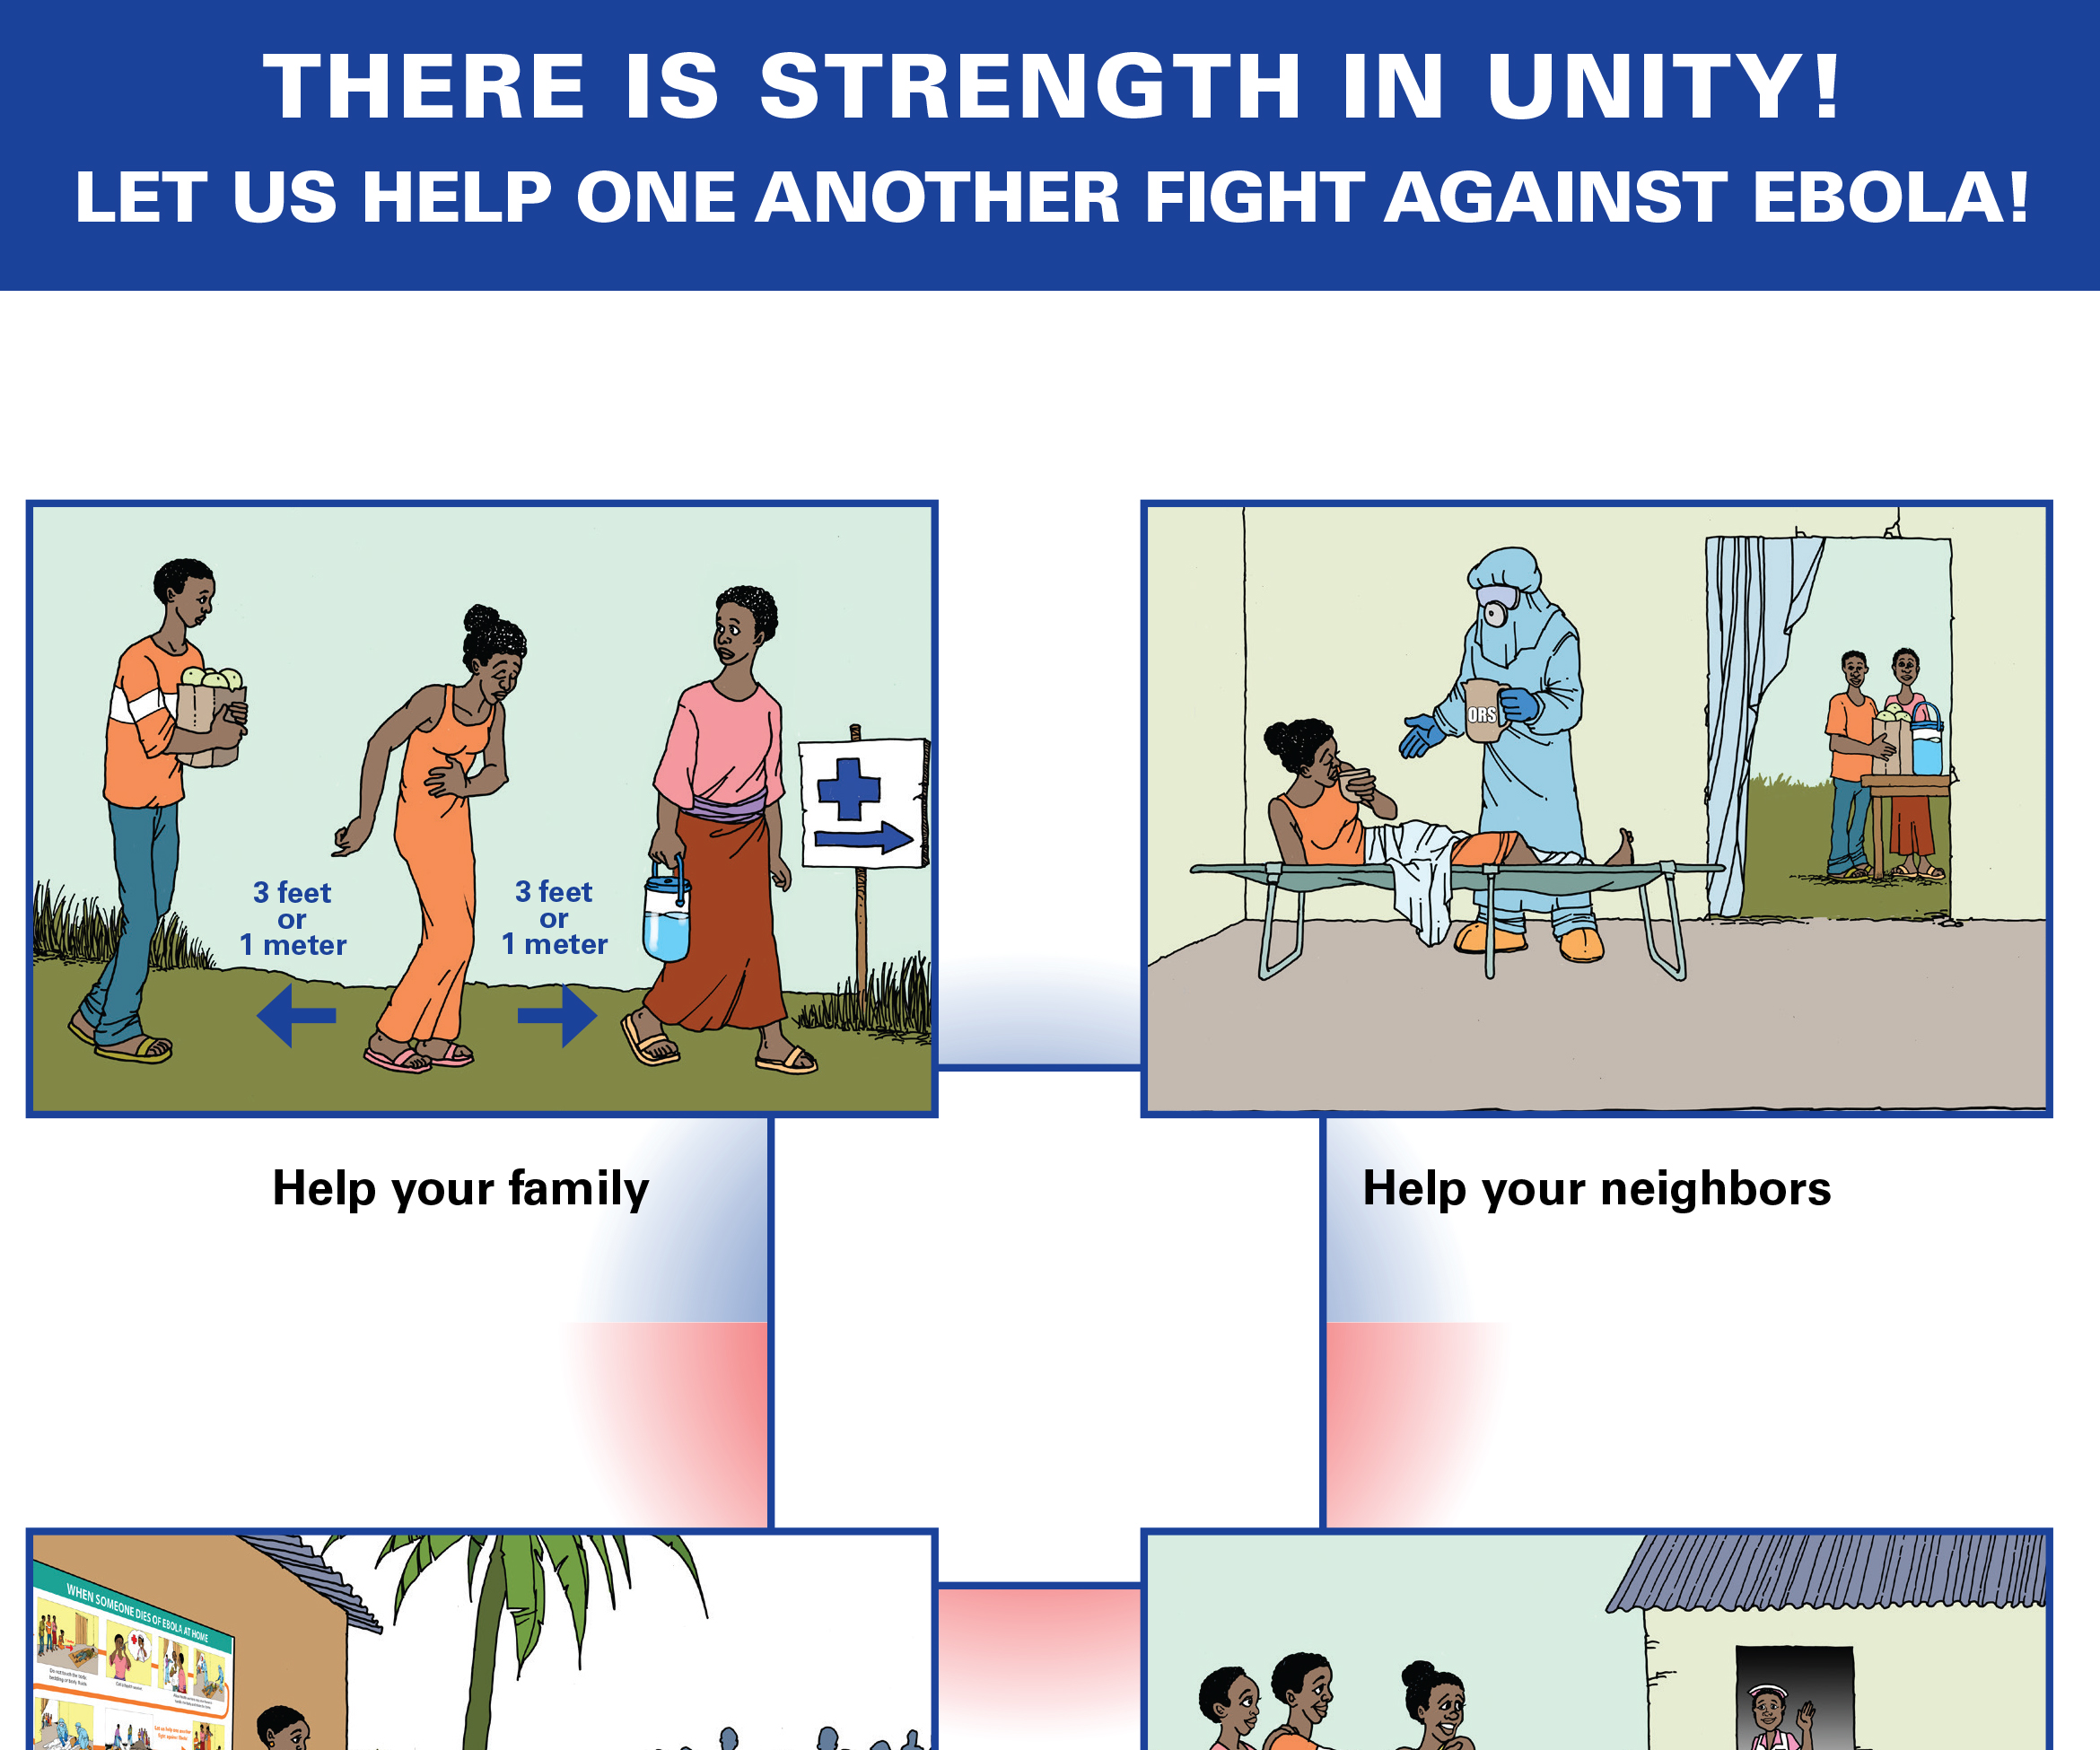 THERE IS STRENGTH IN UNITY!: Poster for Low Literacy Populations on Ebola